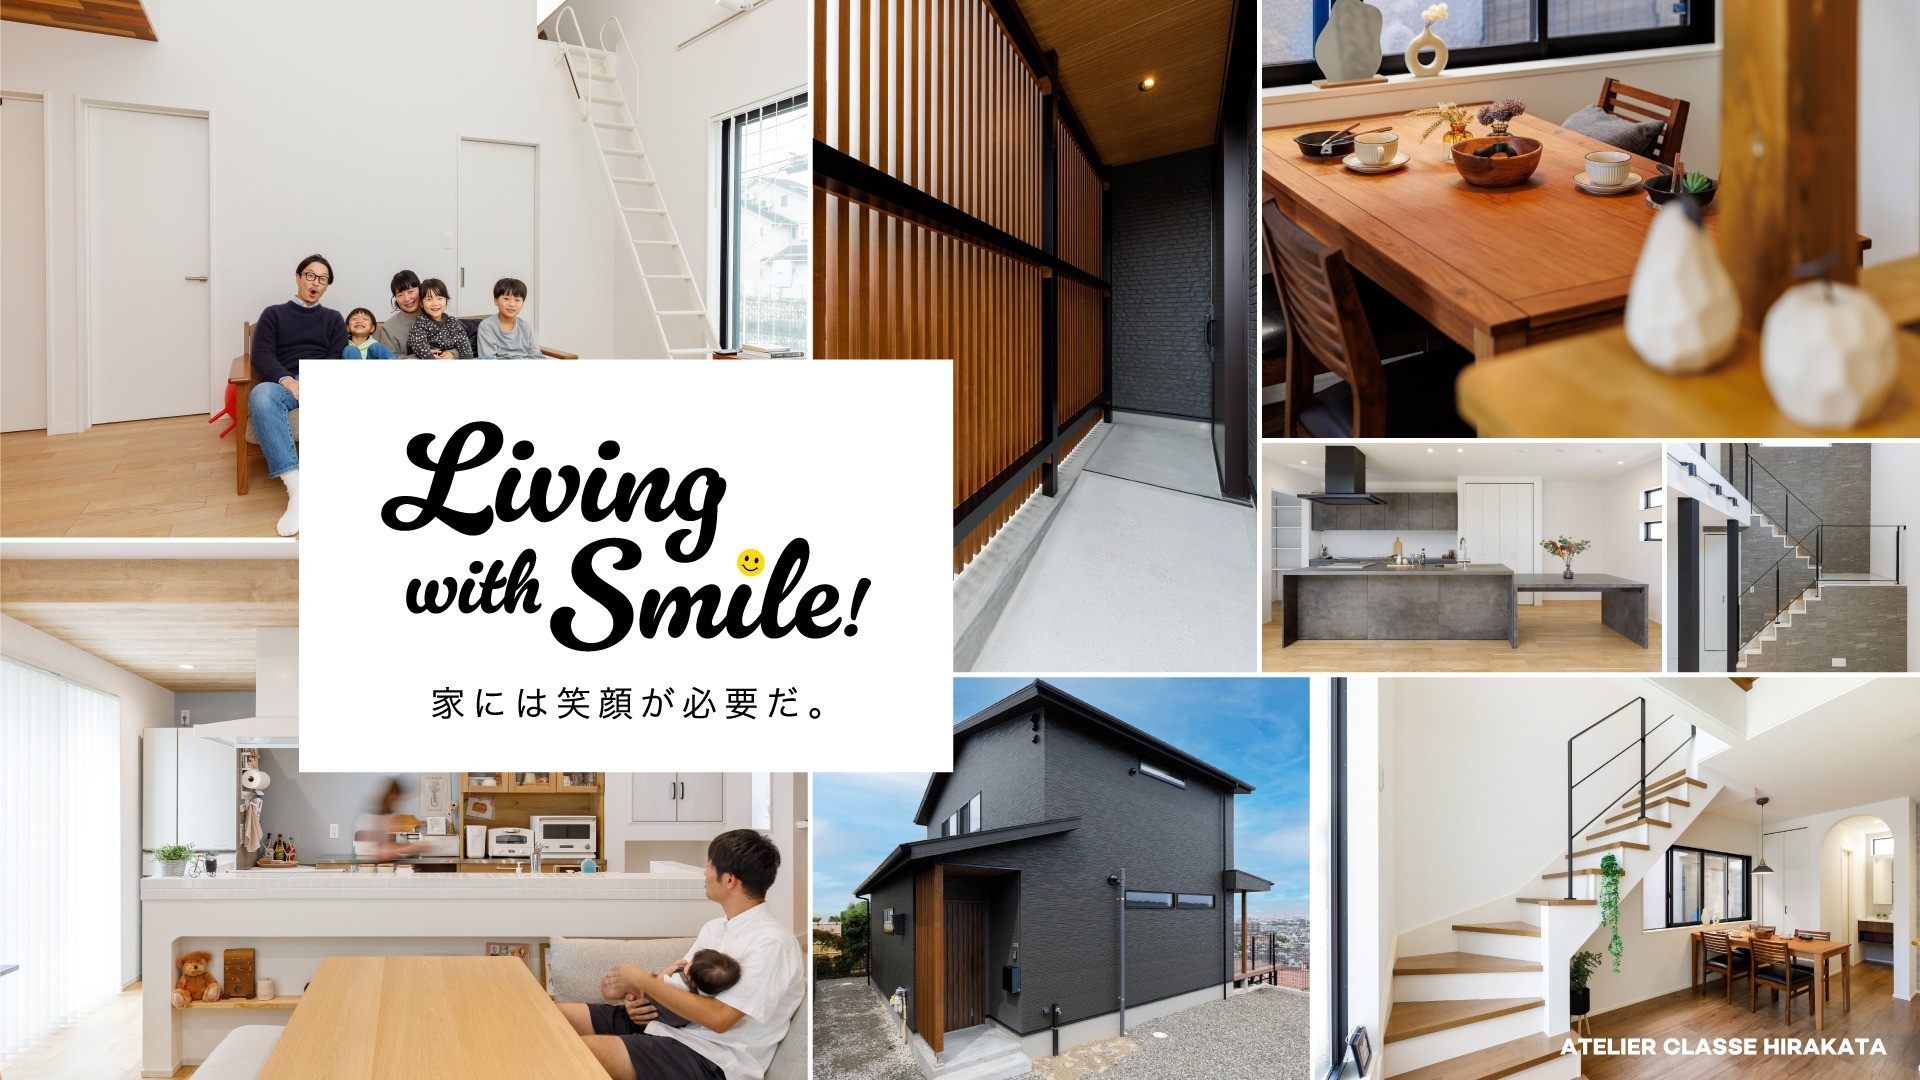 Living with Smile! 家には笑顔が必要だ